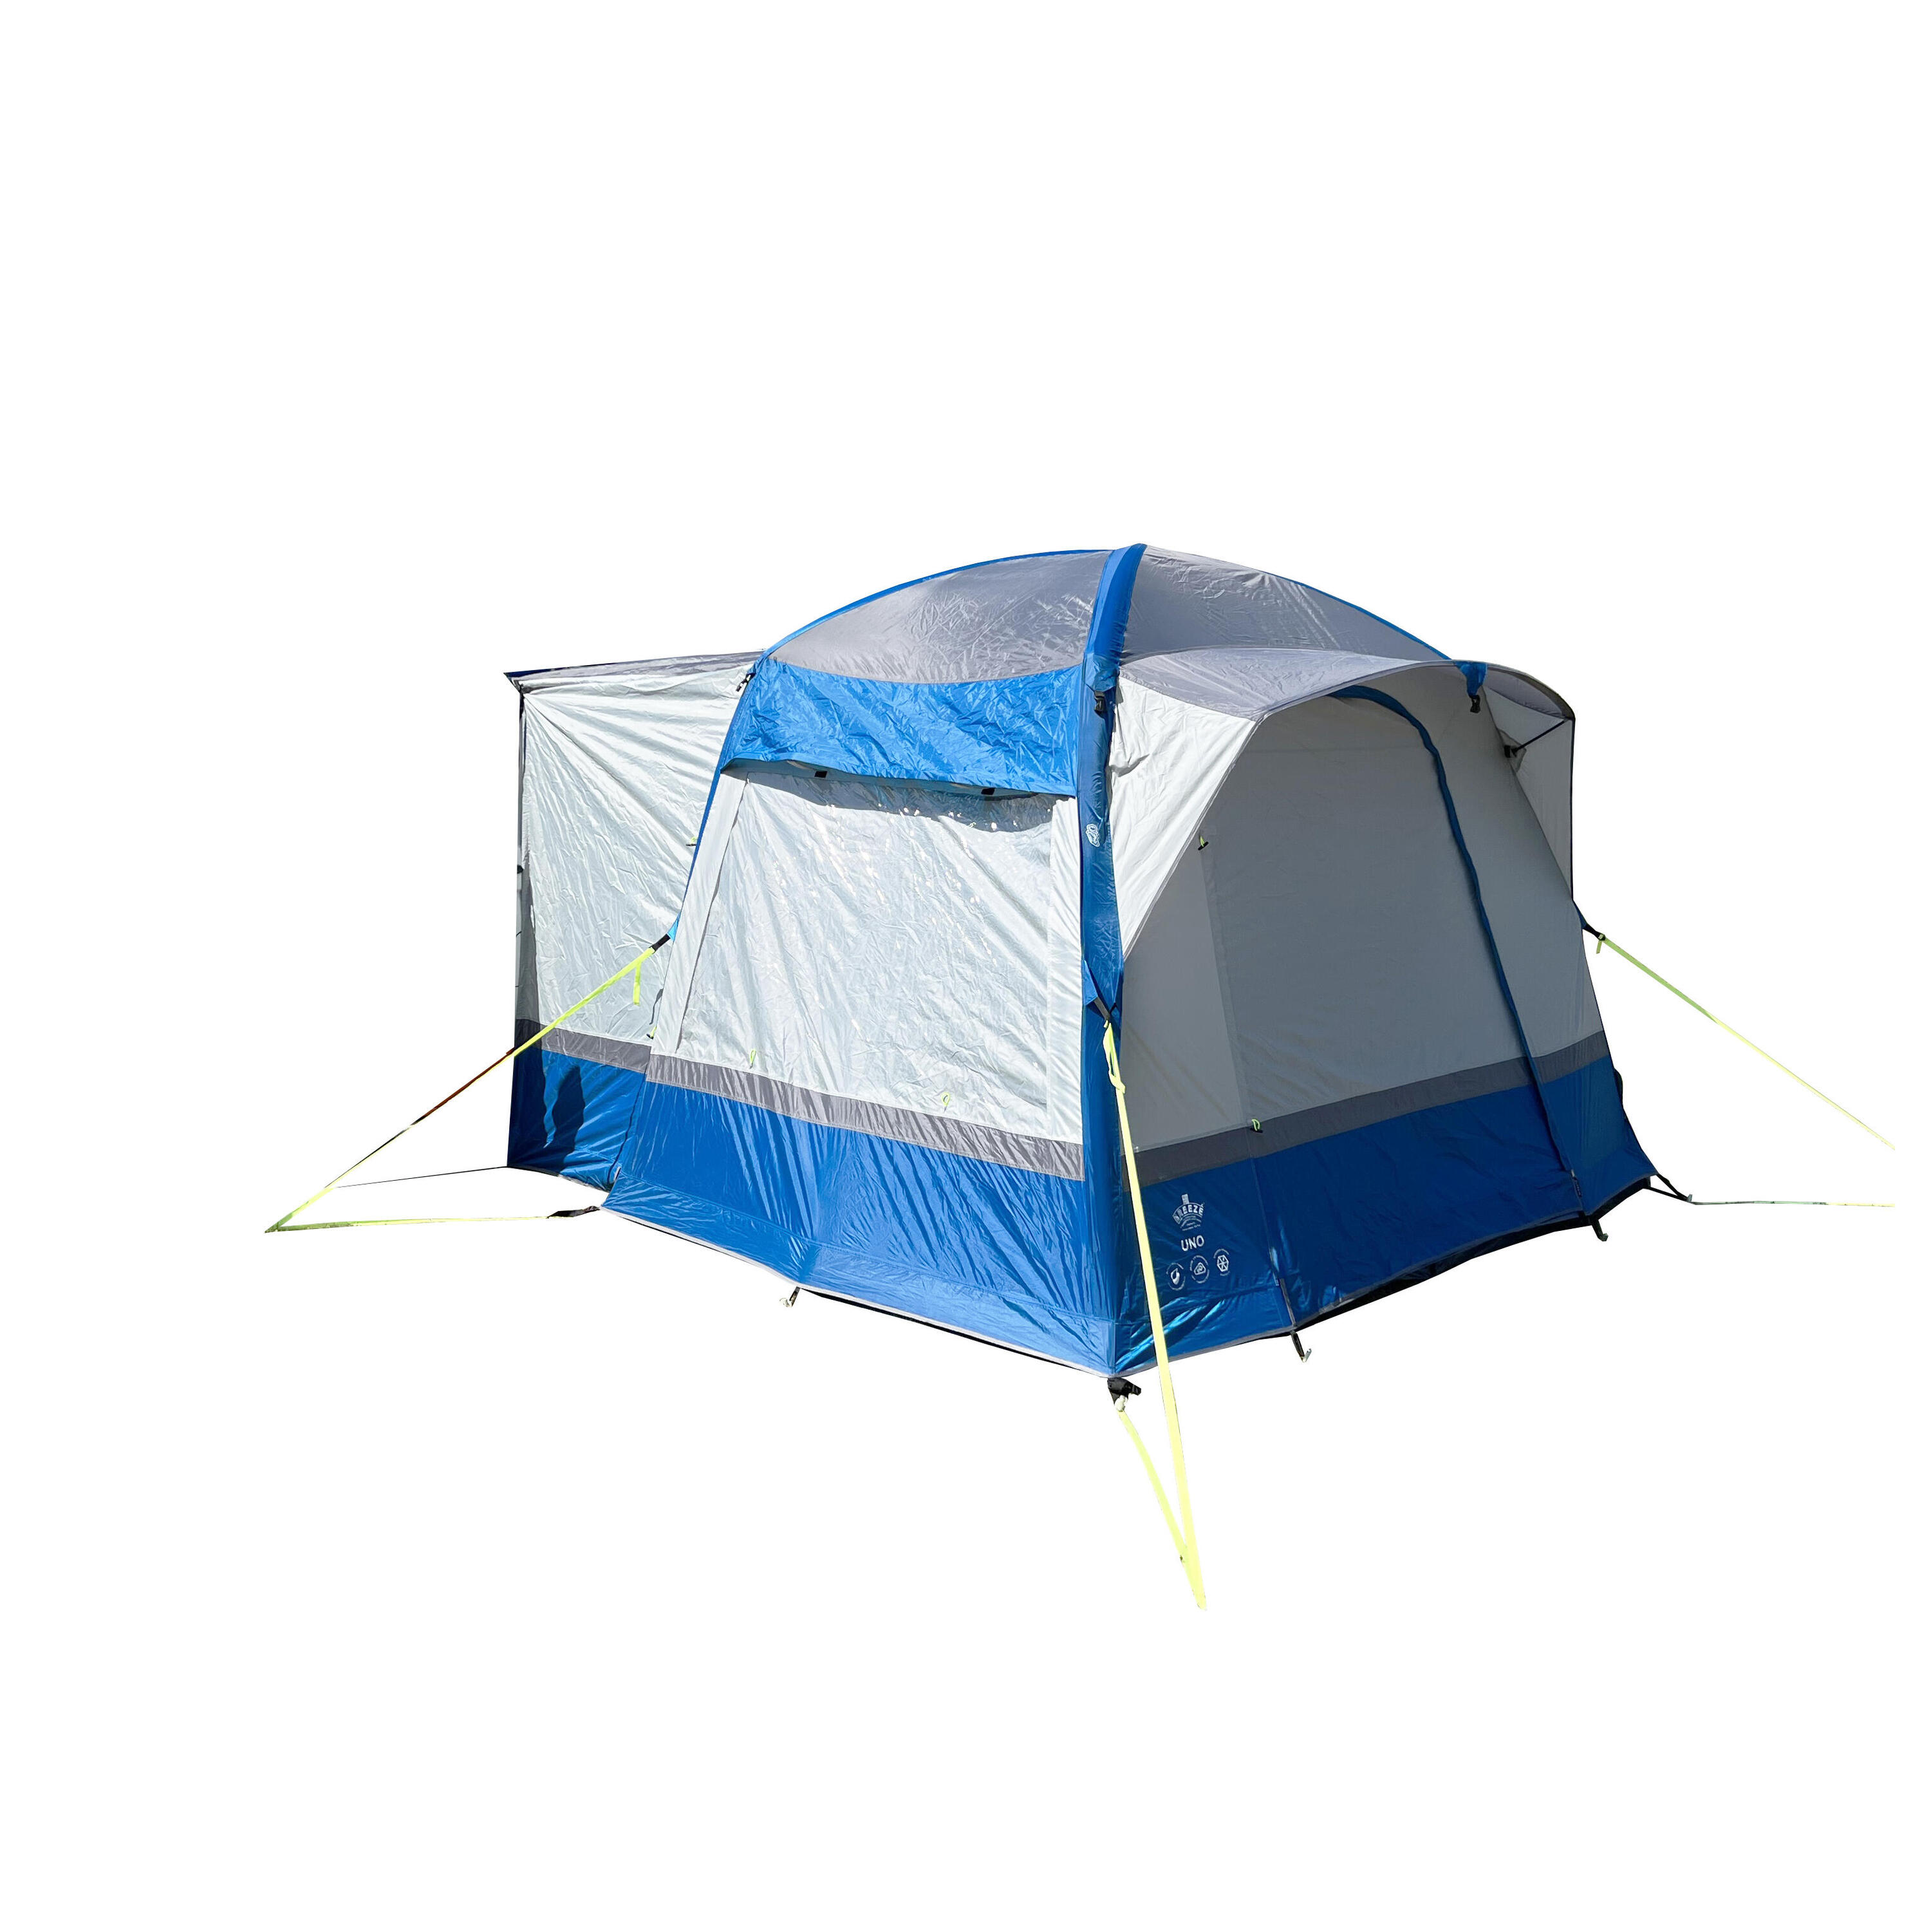 OLPRO OLPRO Uno Breeze - Inflatable Campervan Awning